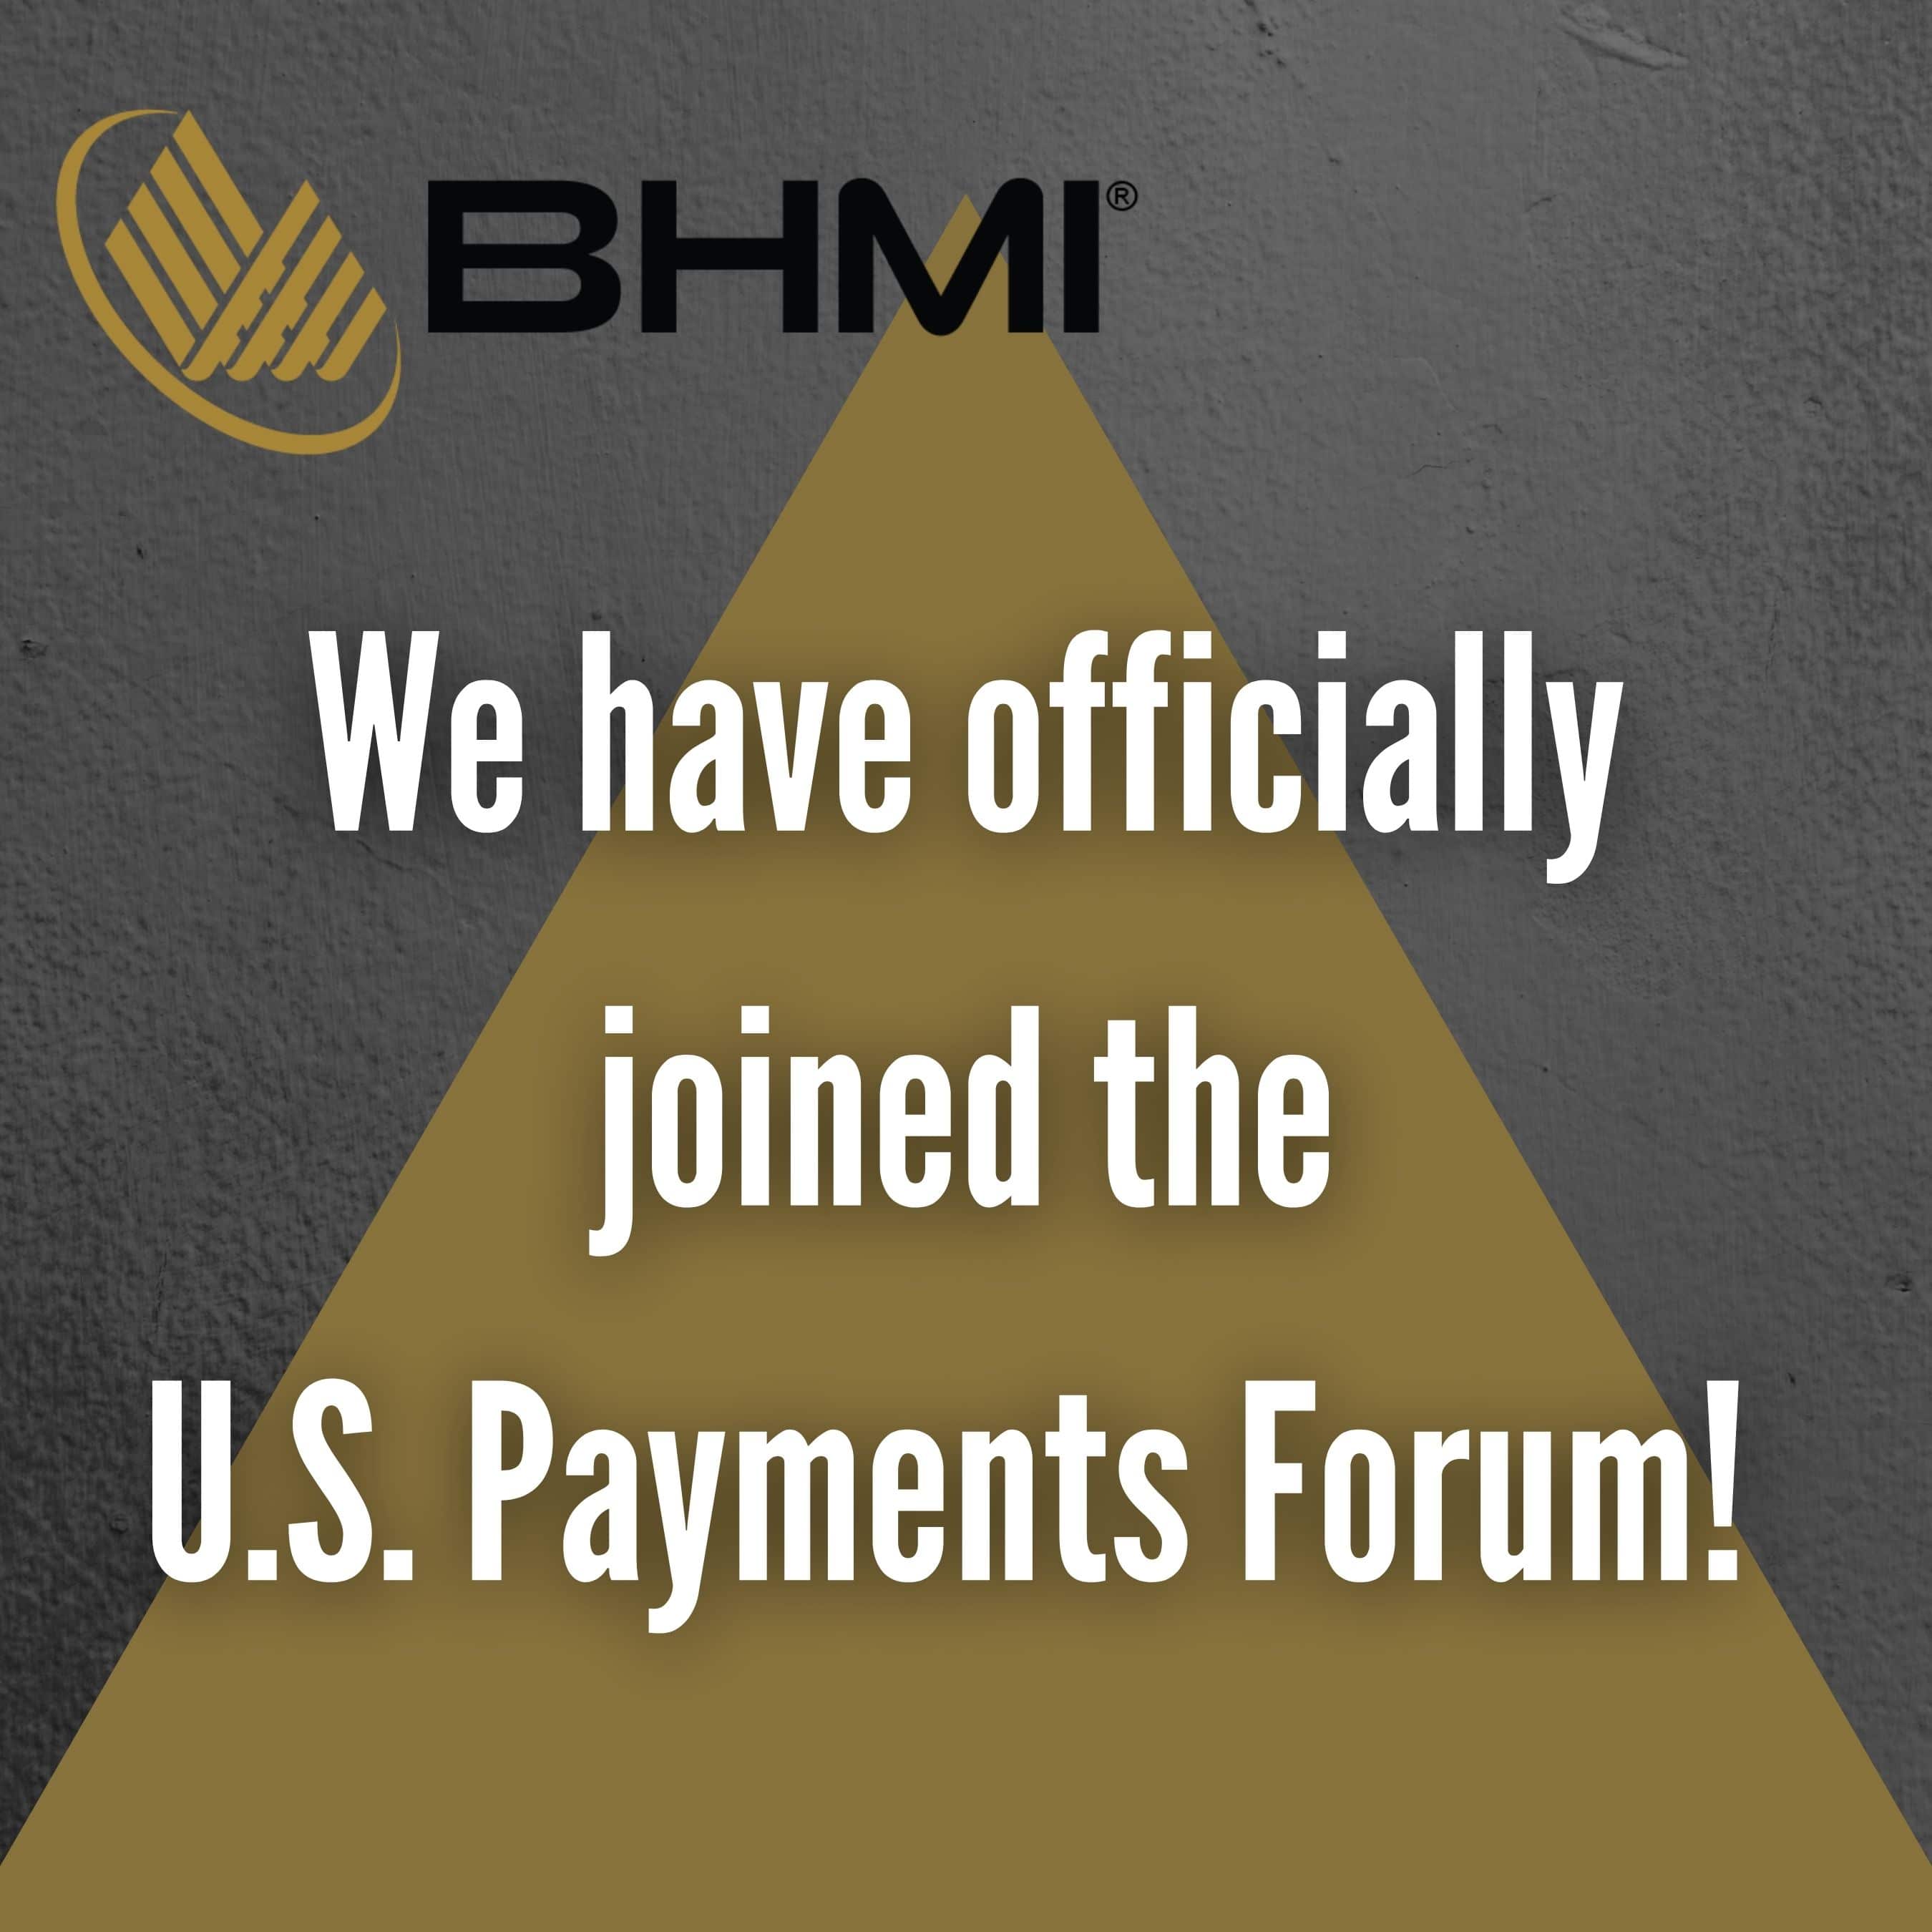 We have Officially Joined the U.S. Payments Forum BHMI